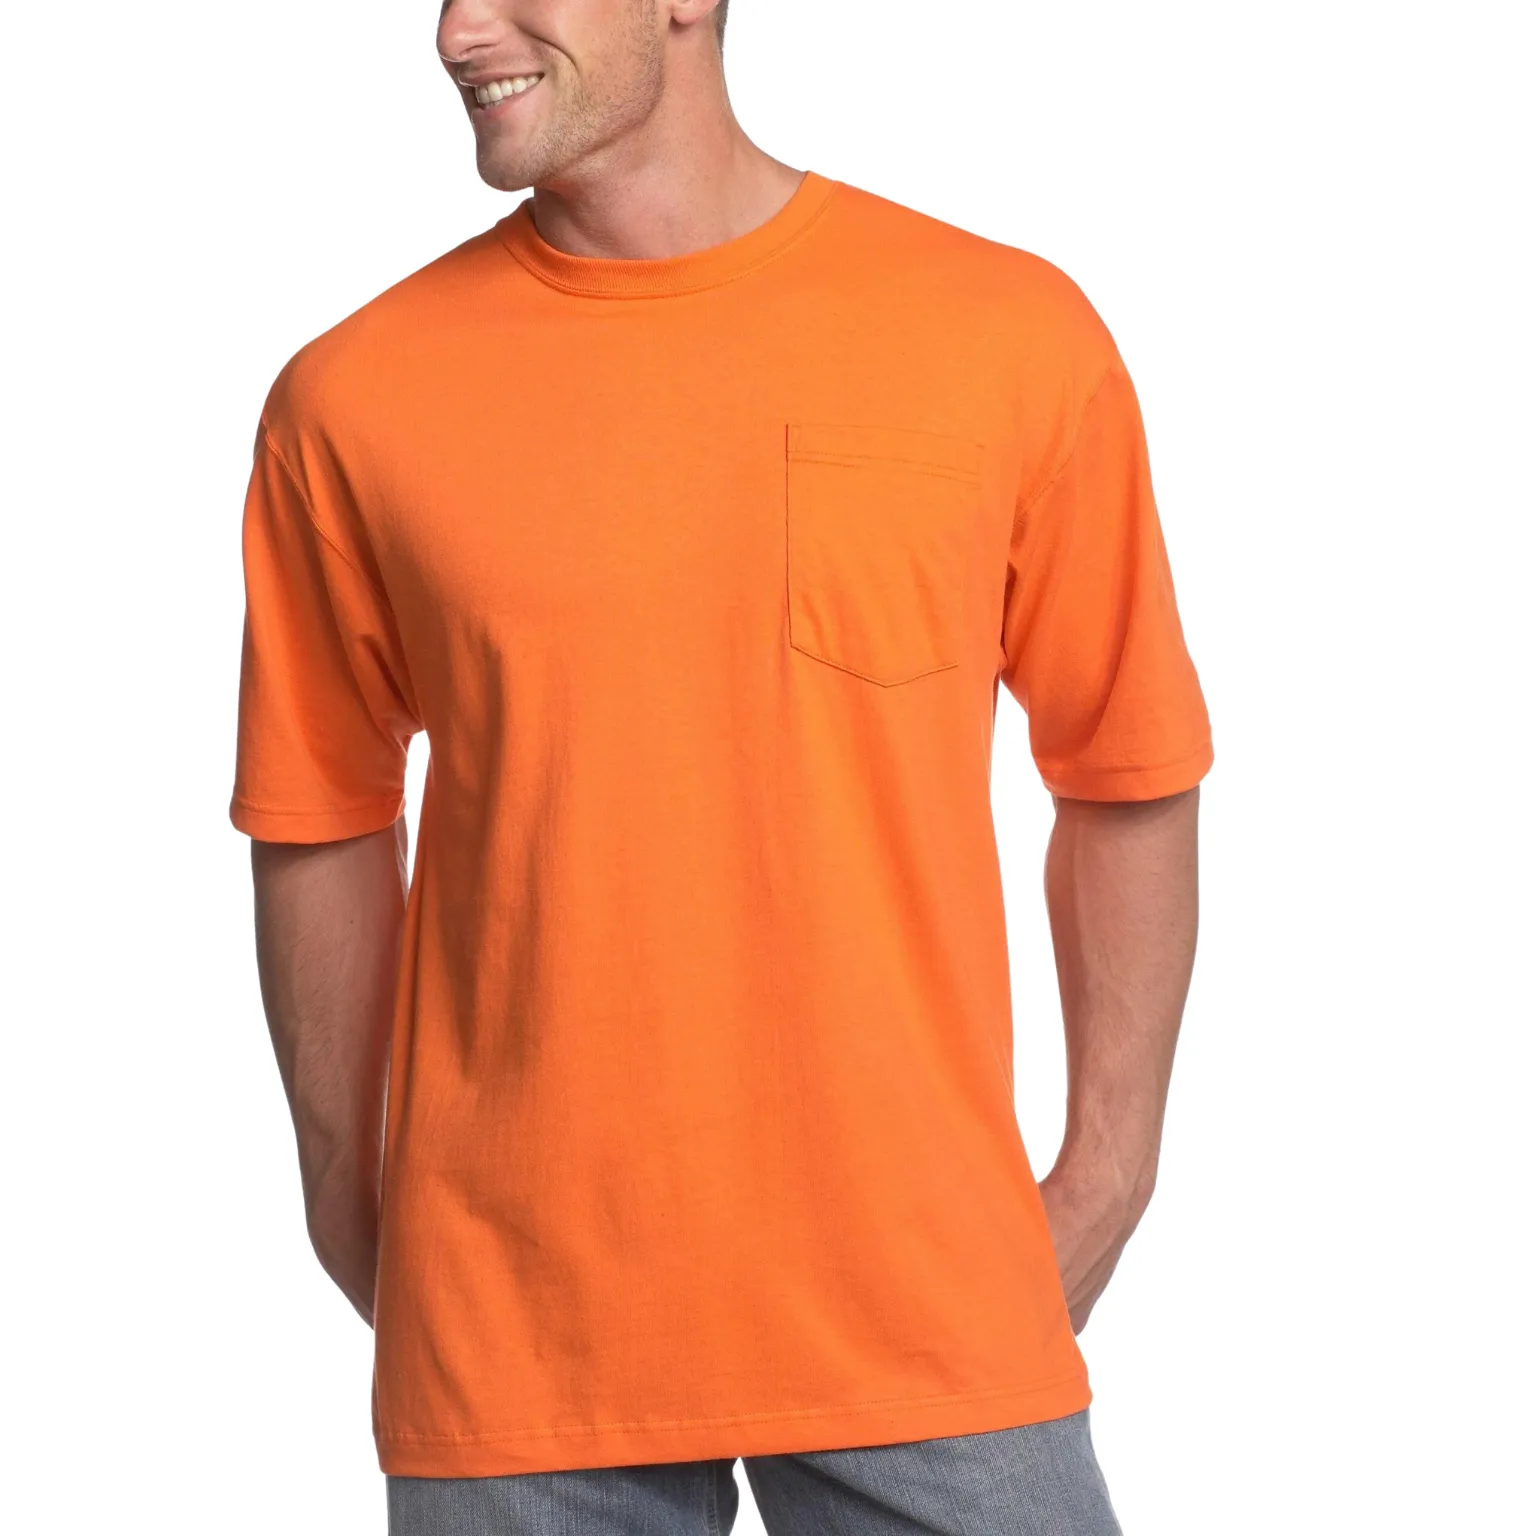 Pocket T-shirt manufacturing with recycled materials